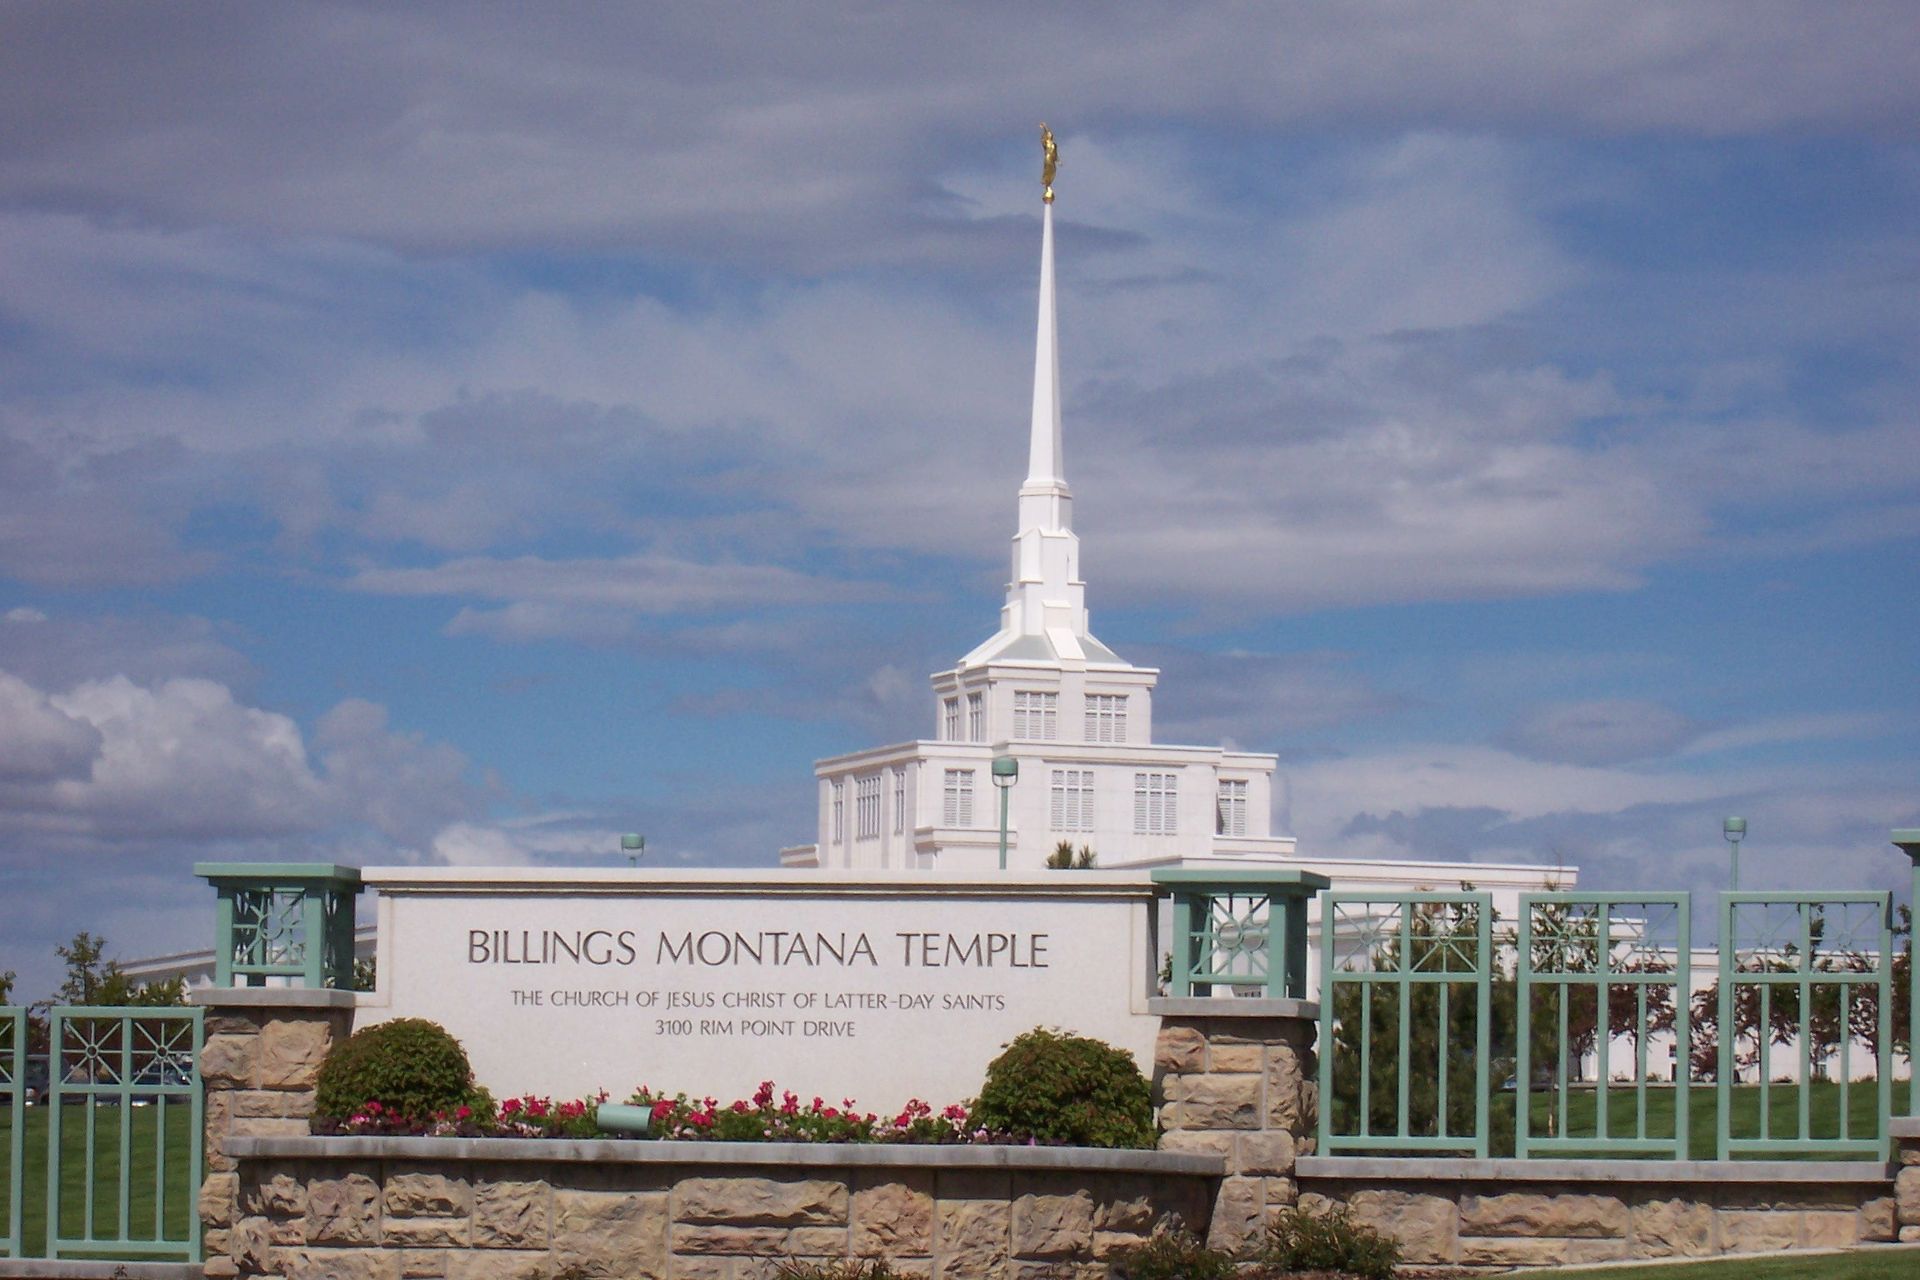 The temple name sign for the Billings Montana Temple.